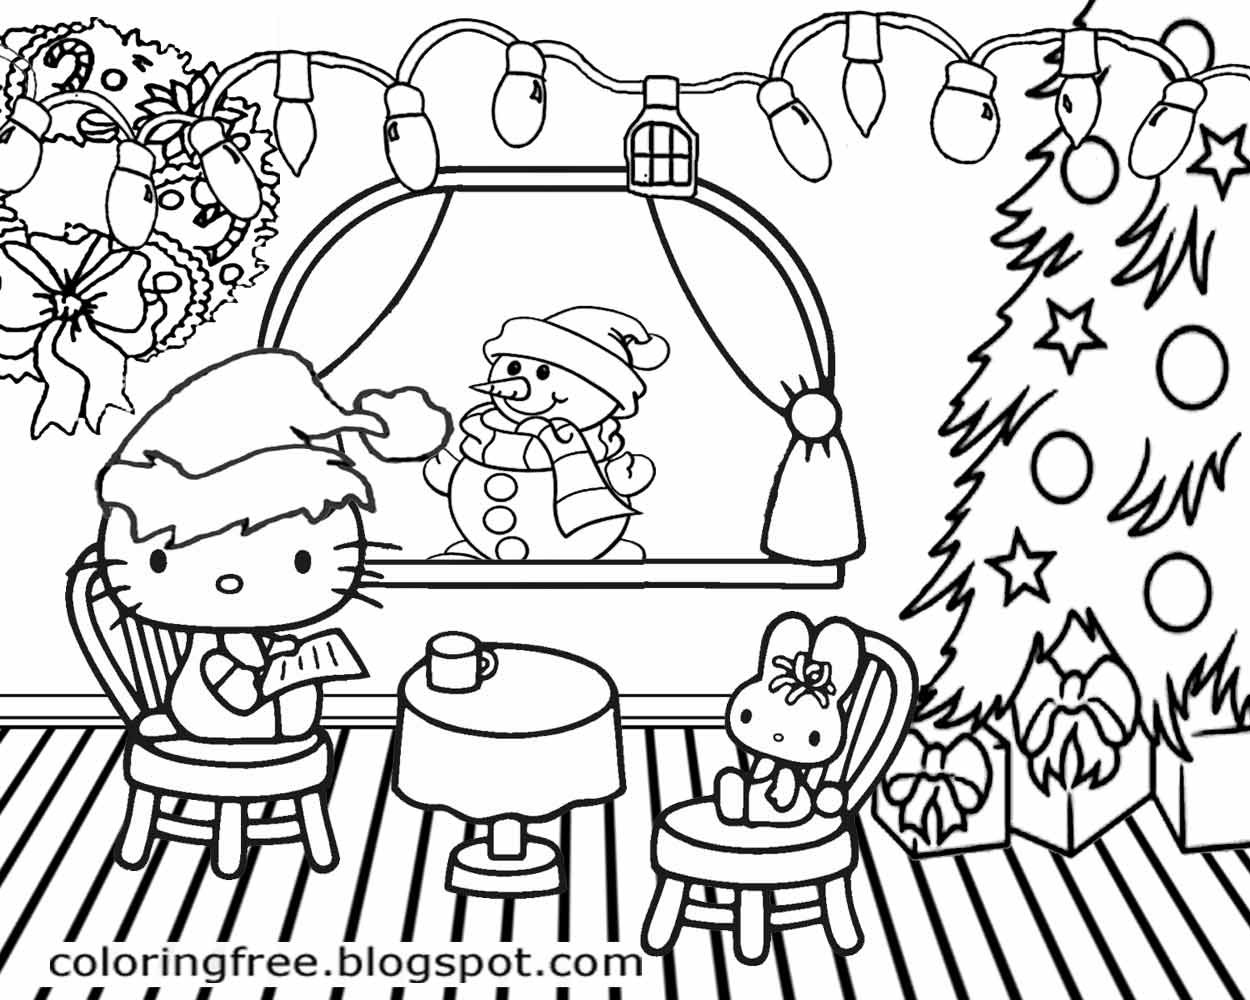 Christmas cute pictures to Color easy